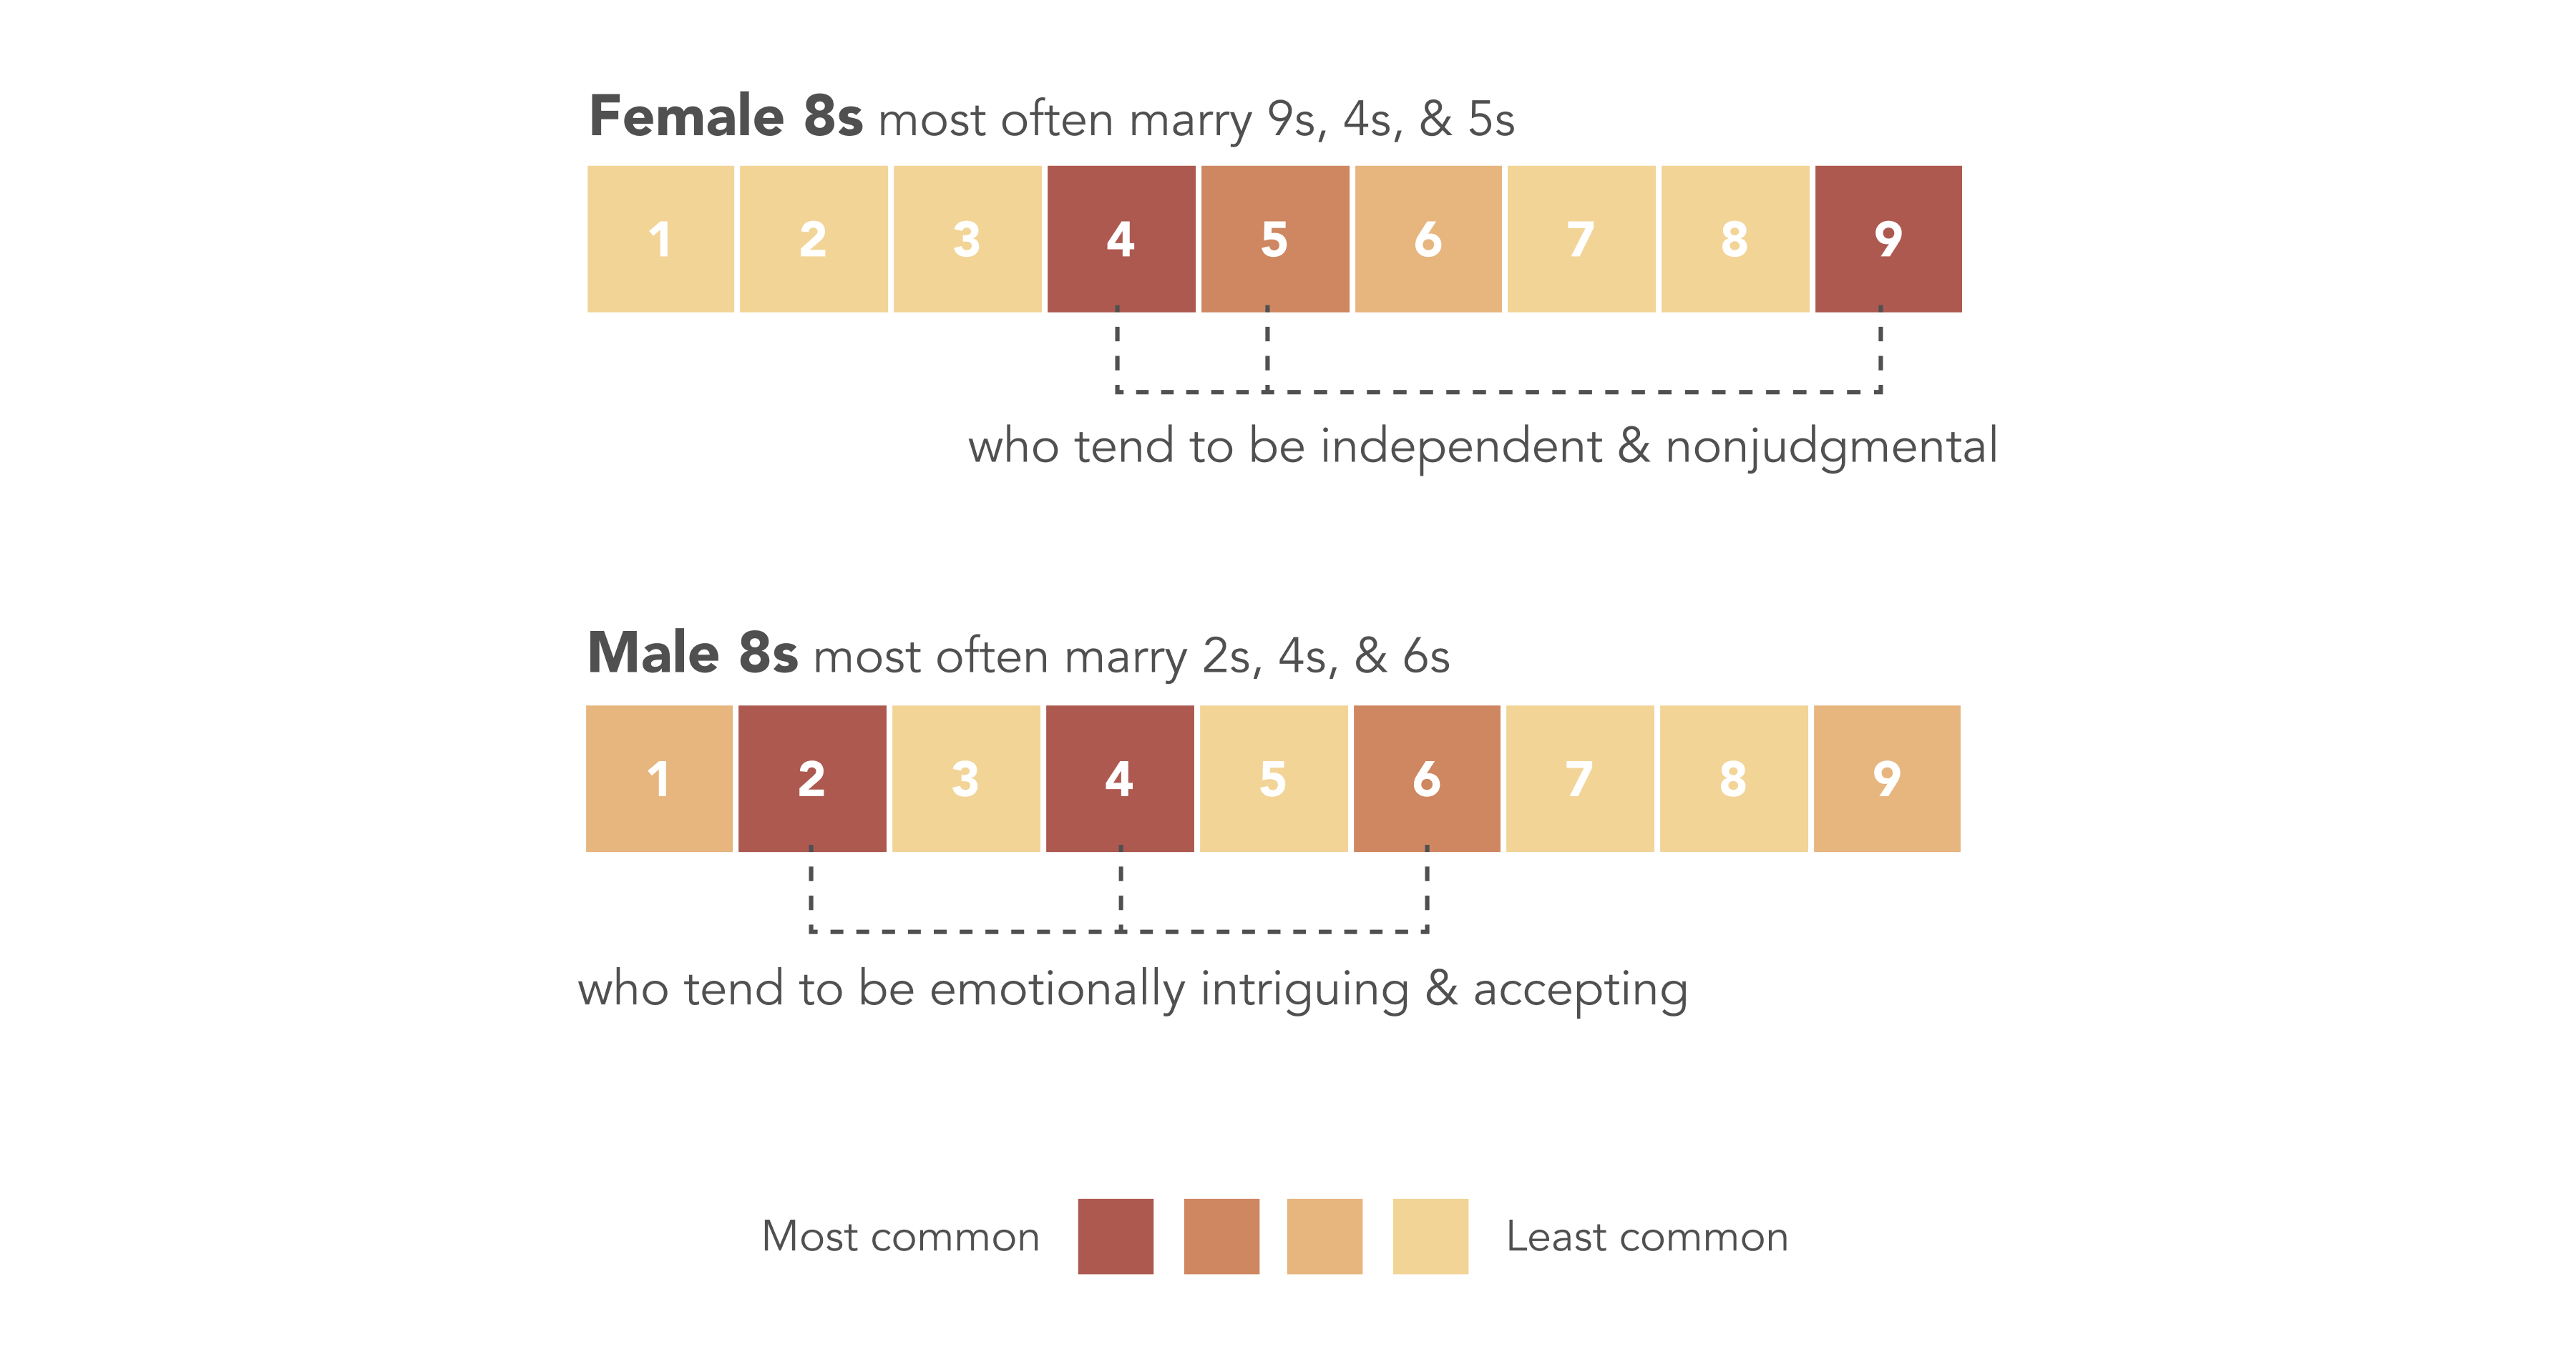 The marriage data we compiled and analyzed was broken down by gender, with Female 8s most often marrying 9s, 4s, and 5s, and Male 8s most often marrying 2s, 4s, and 6s (in that order). 